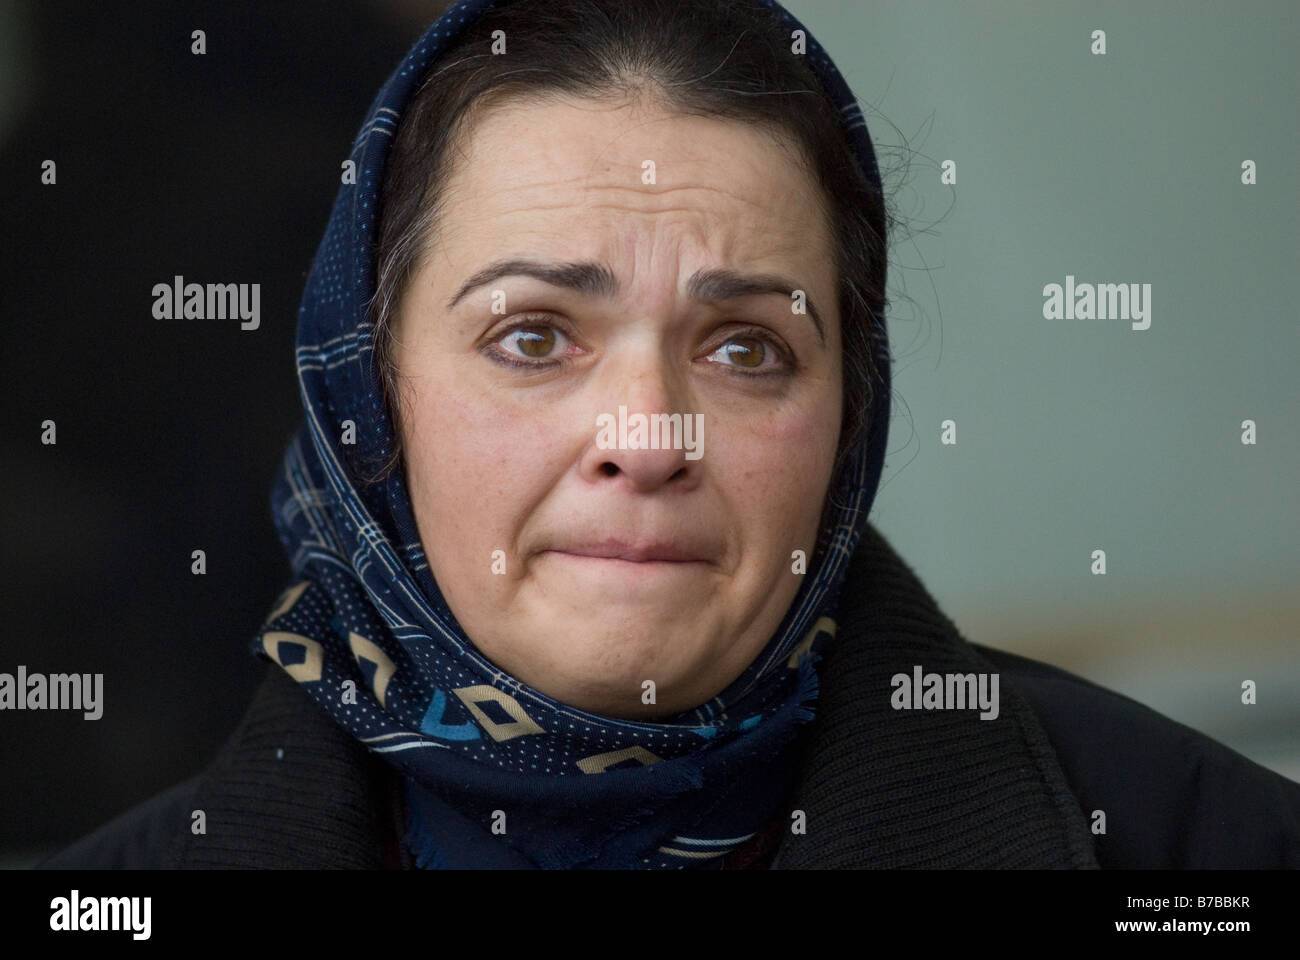 A Palestinian woman resident of Gaza Strip looks worried soon after entering Israel at the Erez border crossing with Israel on January 02 2009 Stock Photo